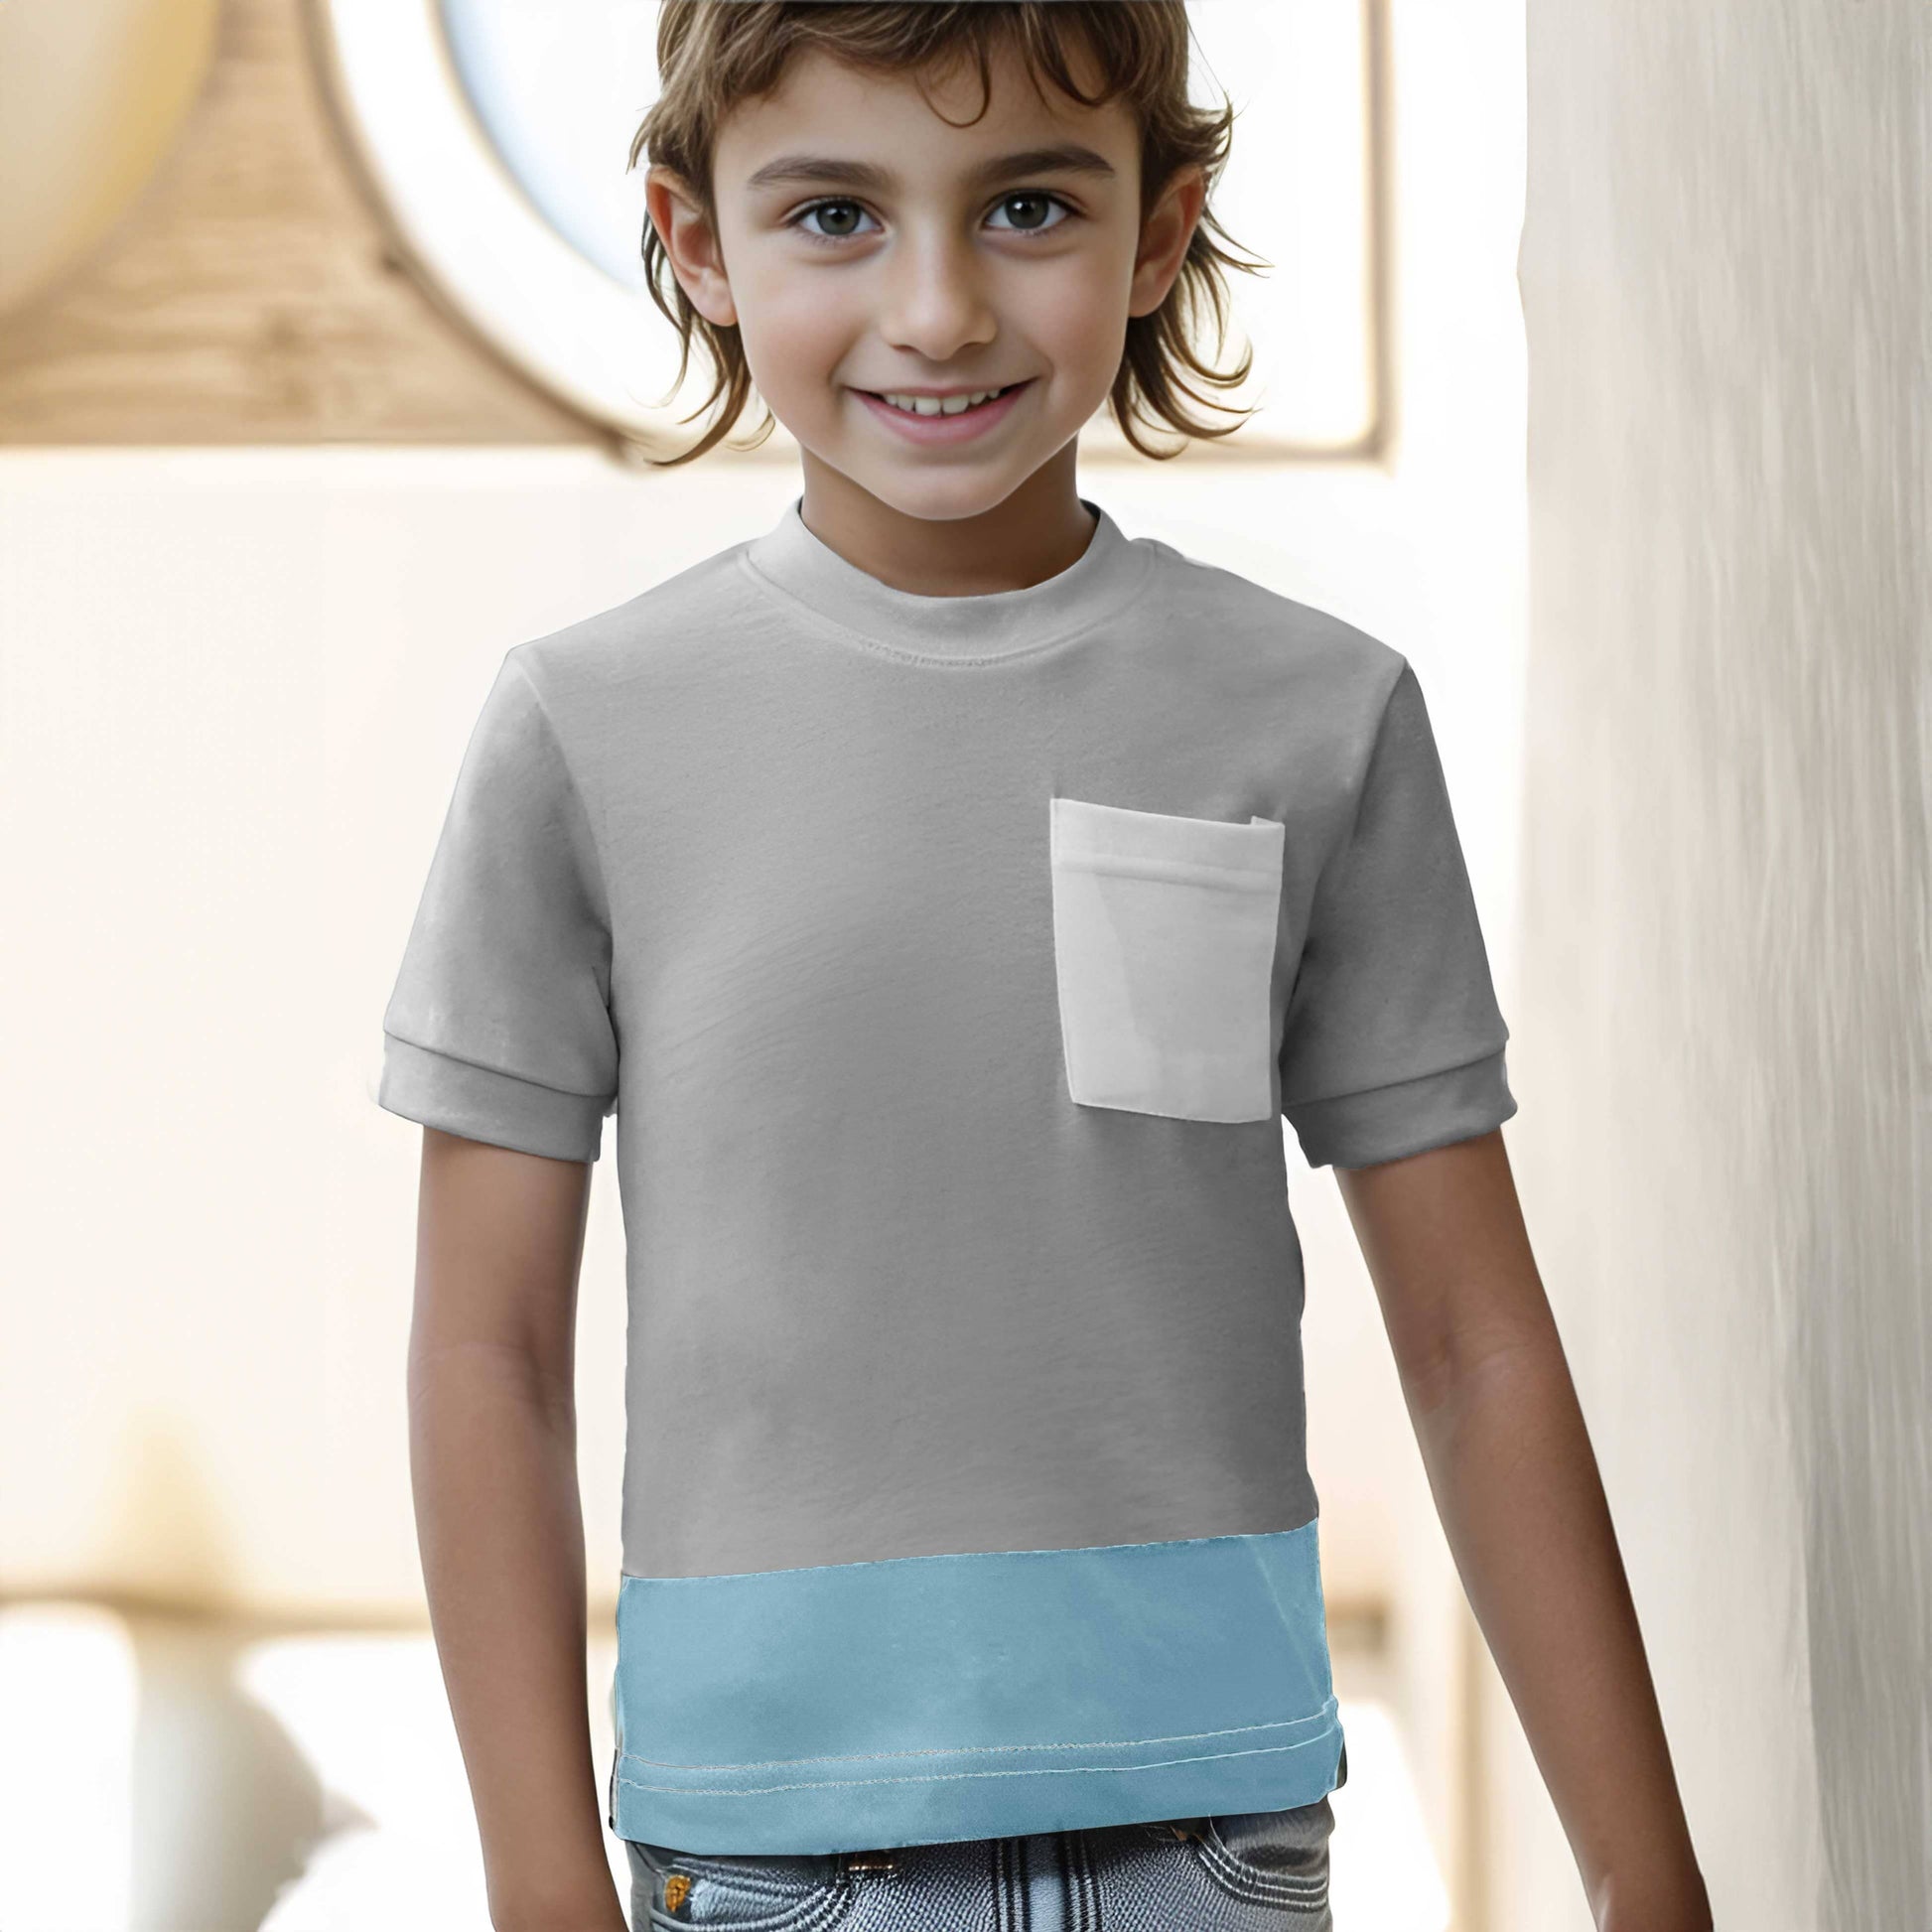 Polo Republica Kid's Contrast Pocket Panel Tee Shirt Kid's Tee Shirt Polo Republica Stealth Grey 2-3 Years 